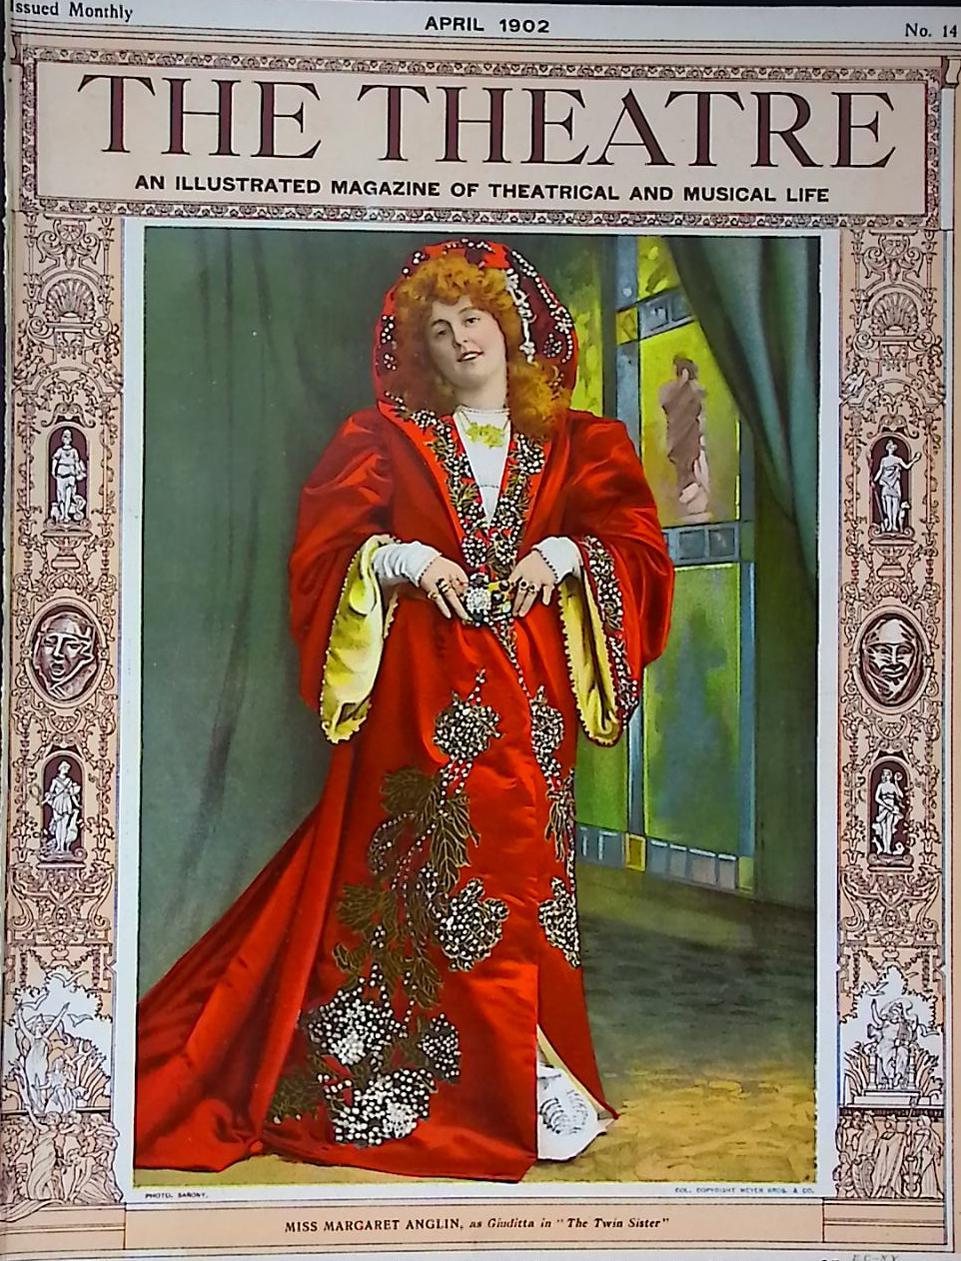 The Theatre. An Illustrated Magazine of Theatrical and Musical Life. January to December, 1902.